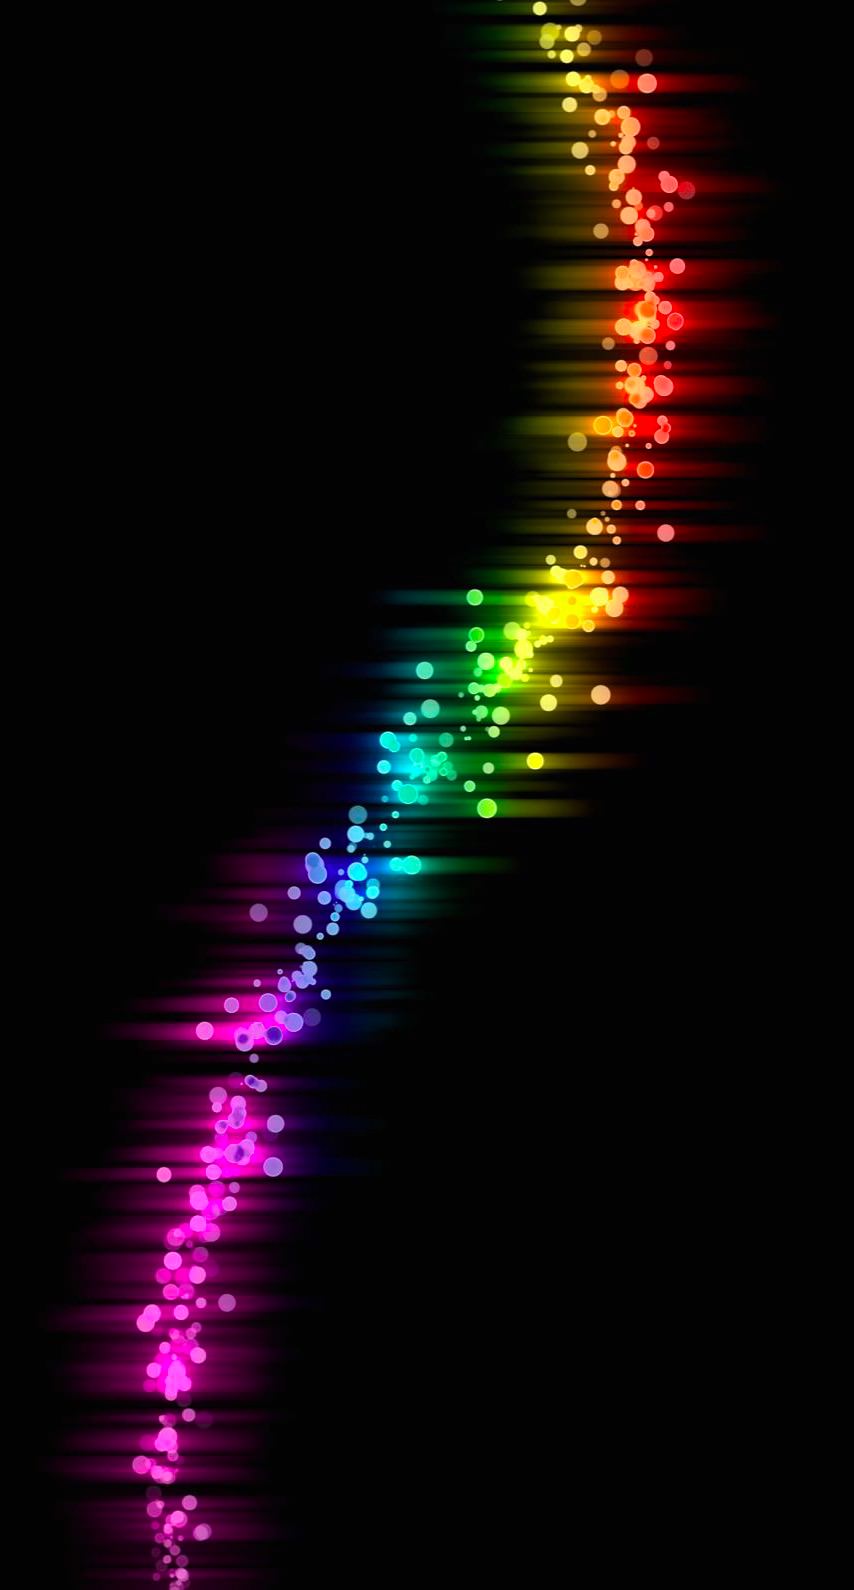 Pattern Colorful Black Cool Wallpaper Sc Iphone8